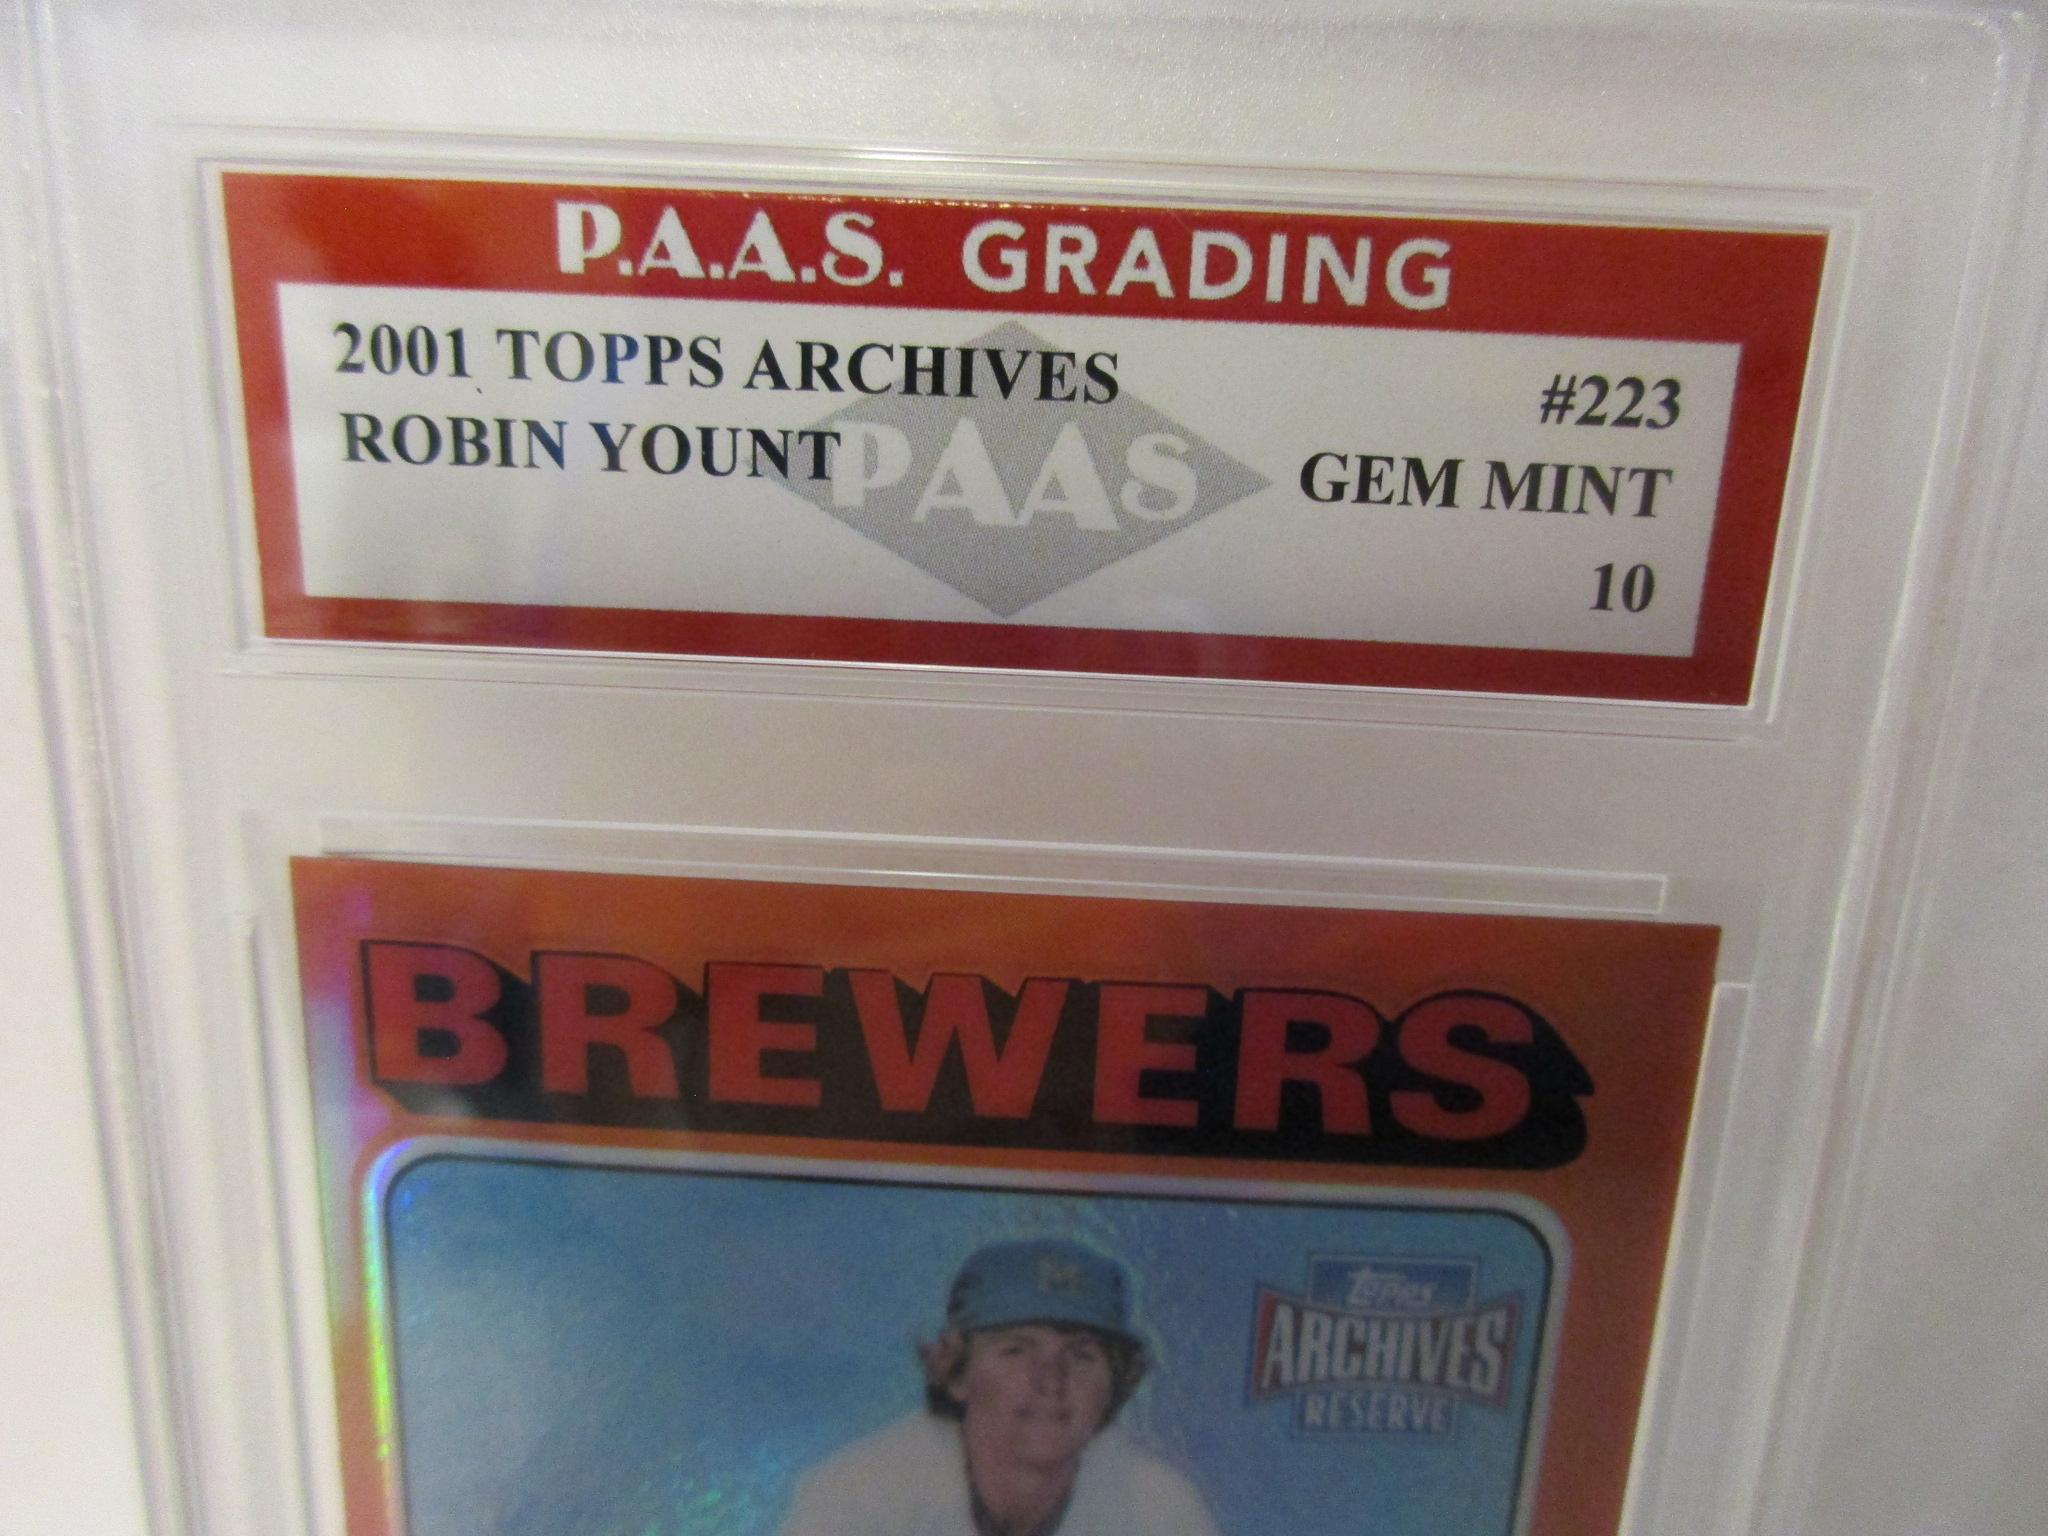 Robin Yount Brewers 2001 Topps Archives #223 graded PAAS Gem Mint 10